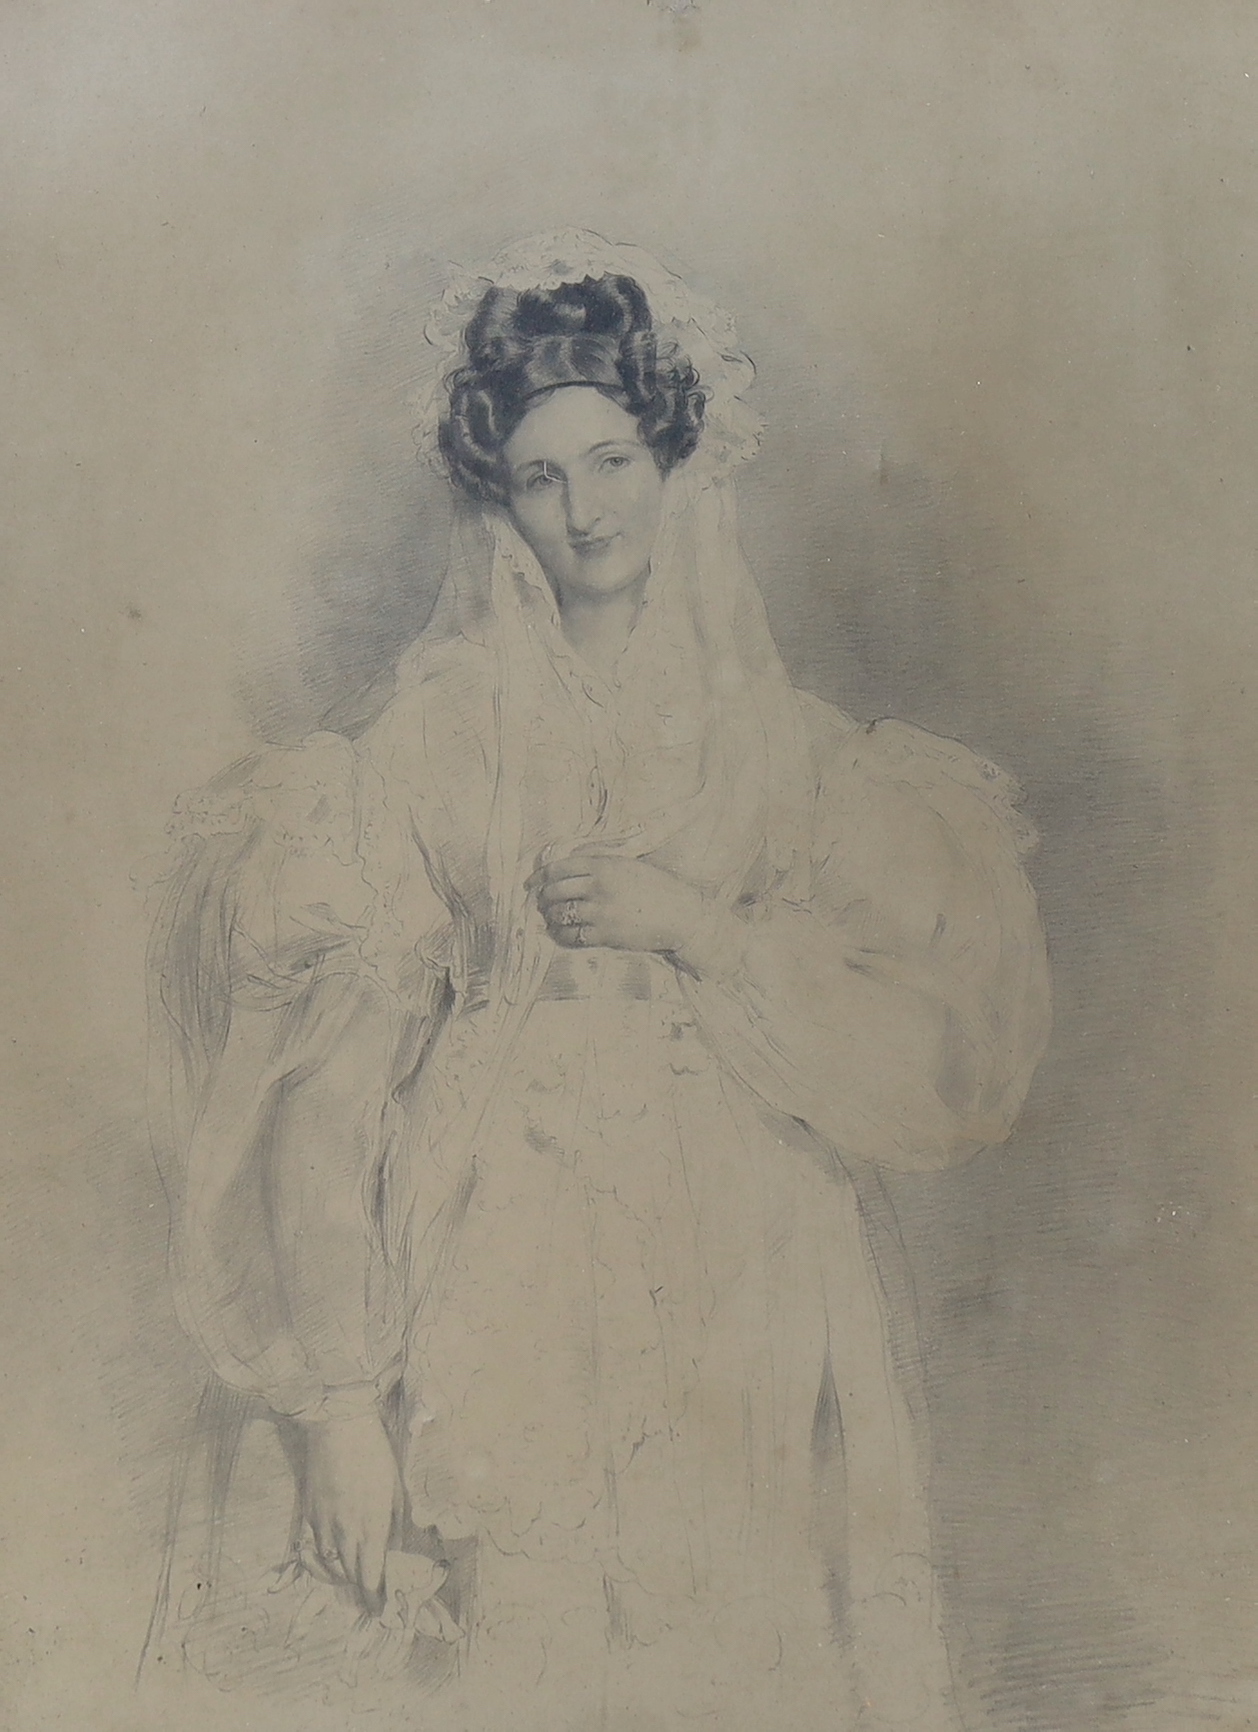 Sir William Charles Ross (1794-1860), lithograph, Portrait of Mary Ann, Countess of Seafield, Wife of the 6th Earl of Seafield, 53 x 39cm, original rosewood frame